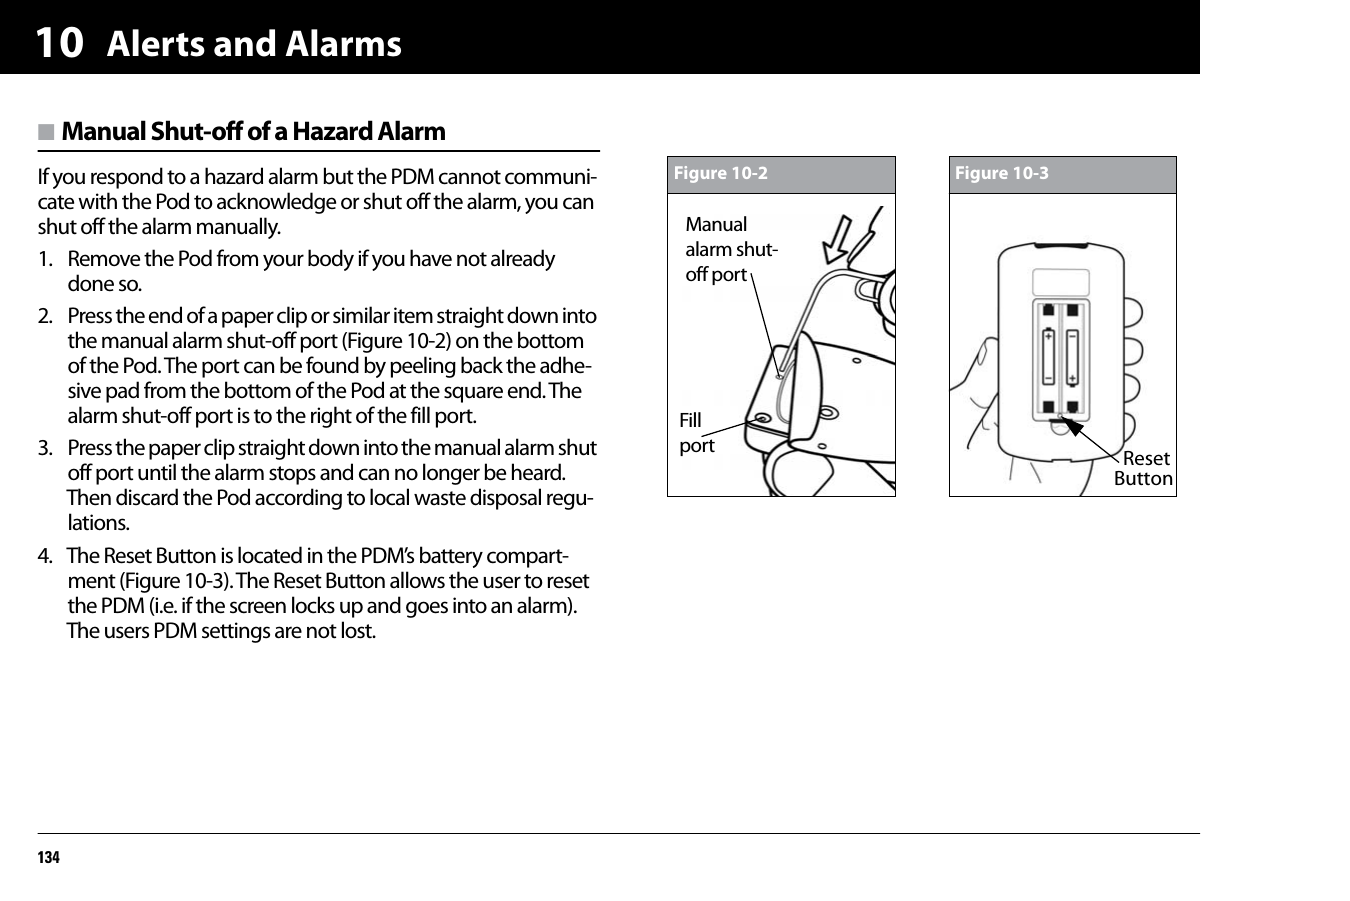 Alerts and Alarms13410n Manual Shut-off of a Hazard AlarmIf you respond to a hazard alarm but the PDM cannot communi-cate with the Pod to acknowledge or shut off the alarm, you can shut off the alarm manually.1. Remove the Pod from your body if you have not already done so.2. Press the end of a paper clip or similar item straight down into the manual alarm shut-off port (Figure 10-2) on the bottom of the Pod. The port can be found by peeling back the adhe-sive pad from the bottom of the Pod at the square end. The alarm shut-off port is to the right of the fill port.3. Press the paper clip straight down into the manual alarm shut off port until the alarm stops and can no longer be heard. Then discard the Pod according to local waste disposal regu-lations.4. The Reset Button is located in the PDM’s battery compart-ment (Figure 10-3). The Reset Button allows the user to reset the PDM (i.e. if the screen locks up and goes into an alarm). The users PDM settings are not lost.Figure 10-2Manual alarm shut-off portFillportFigure 10-3ResetButton